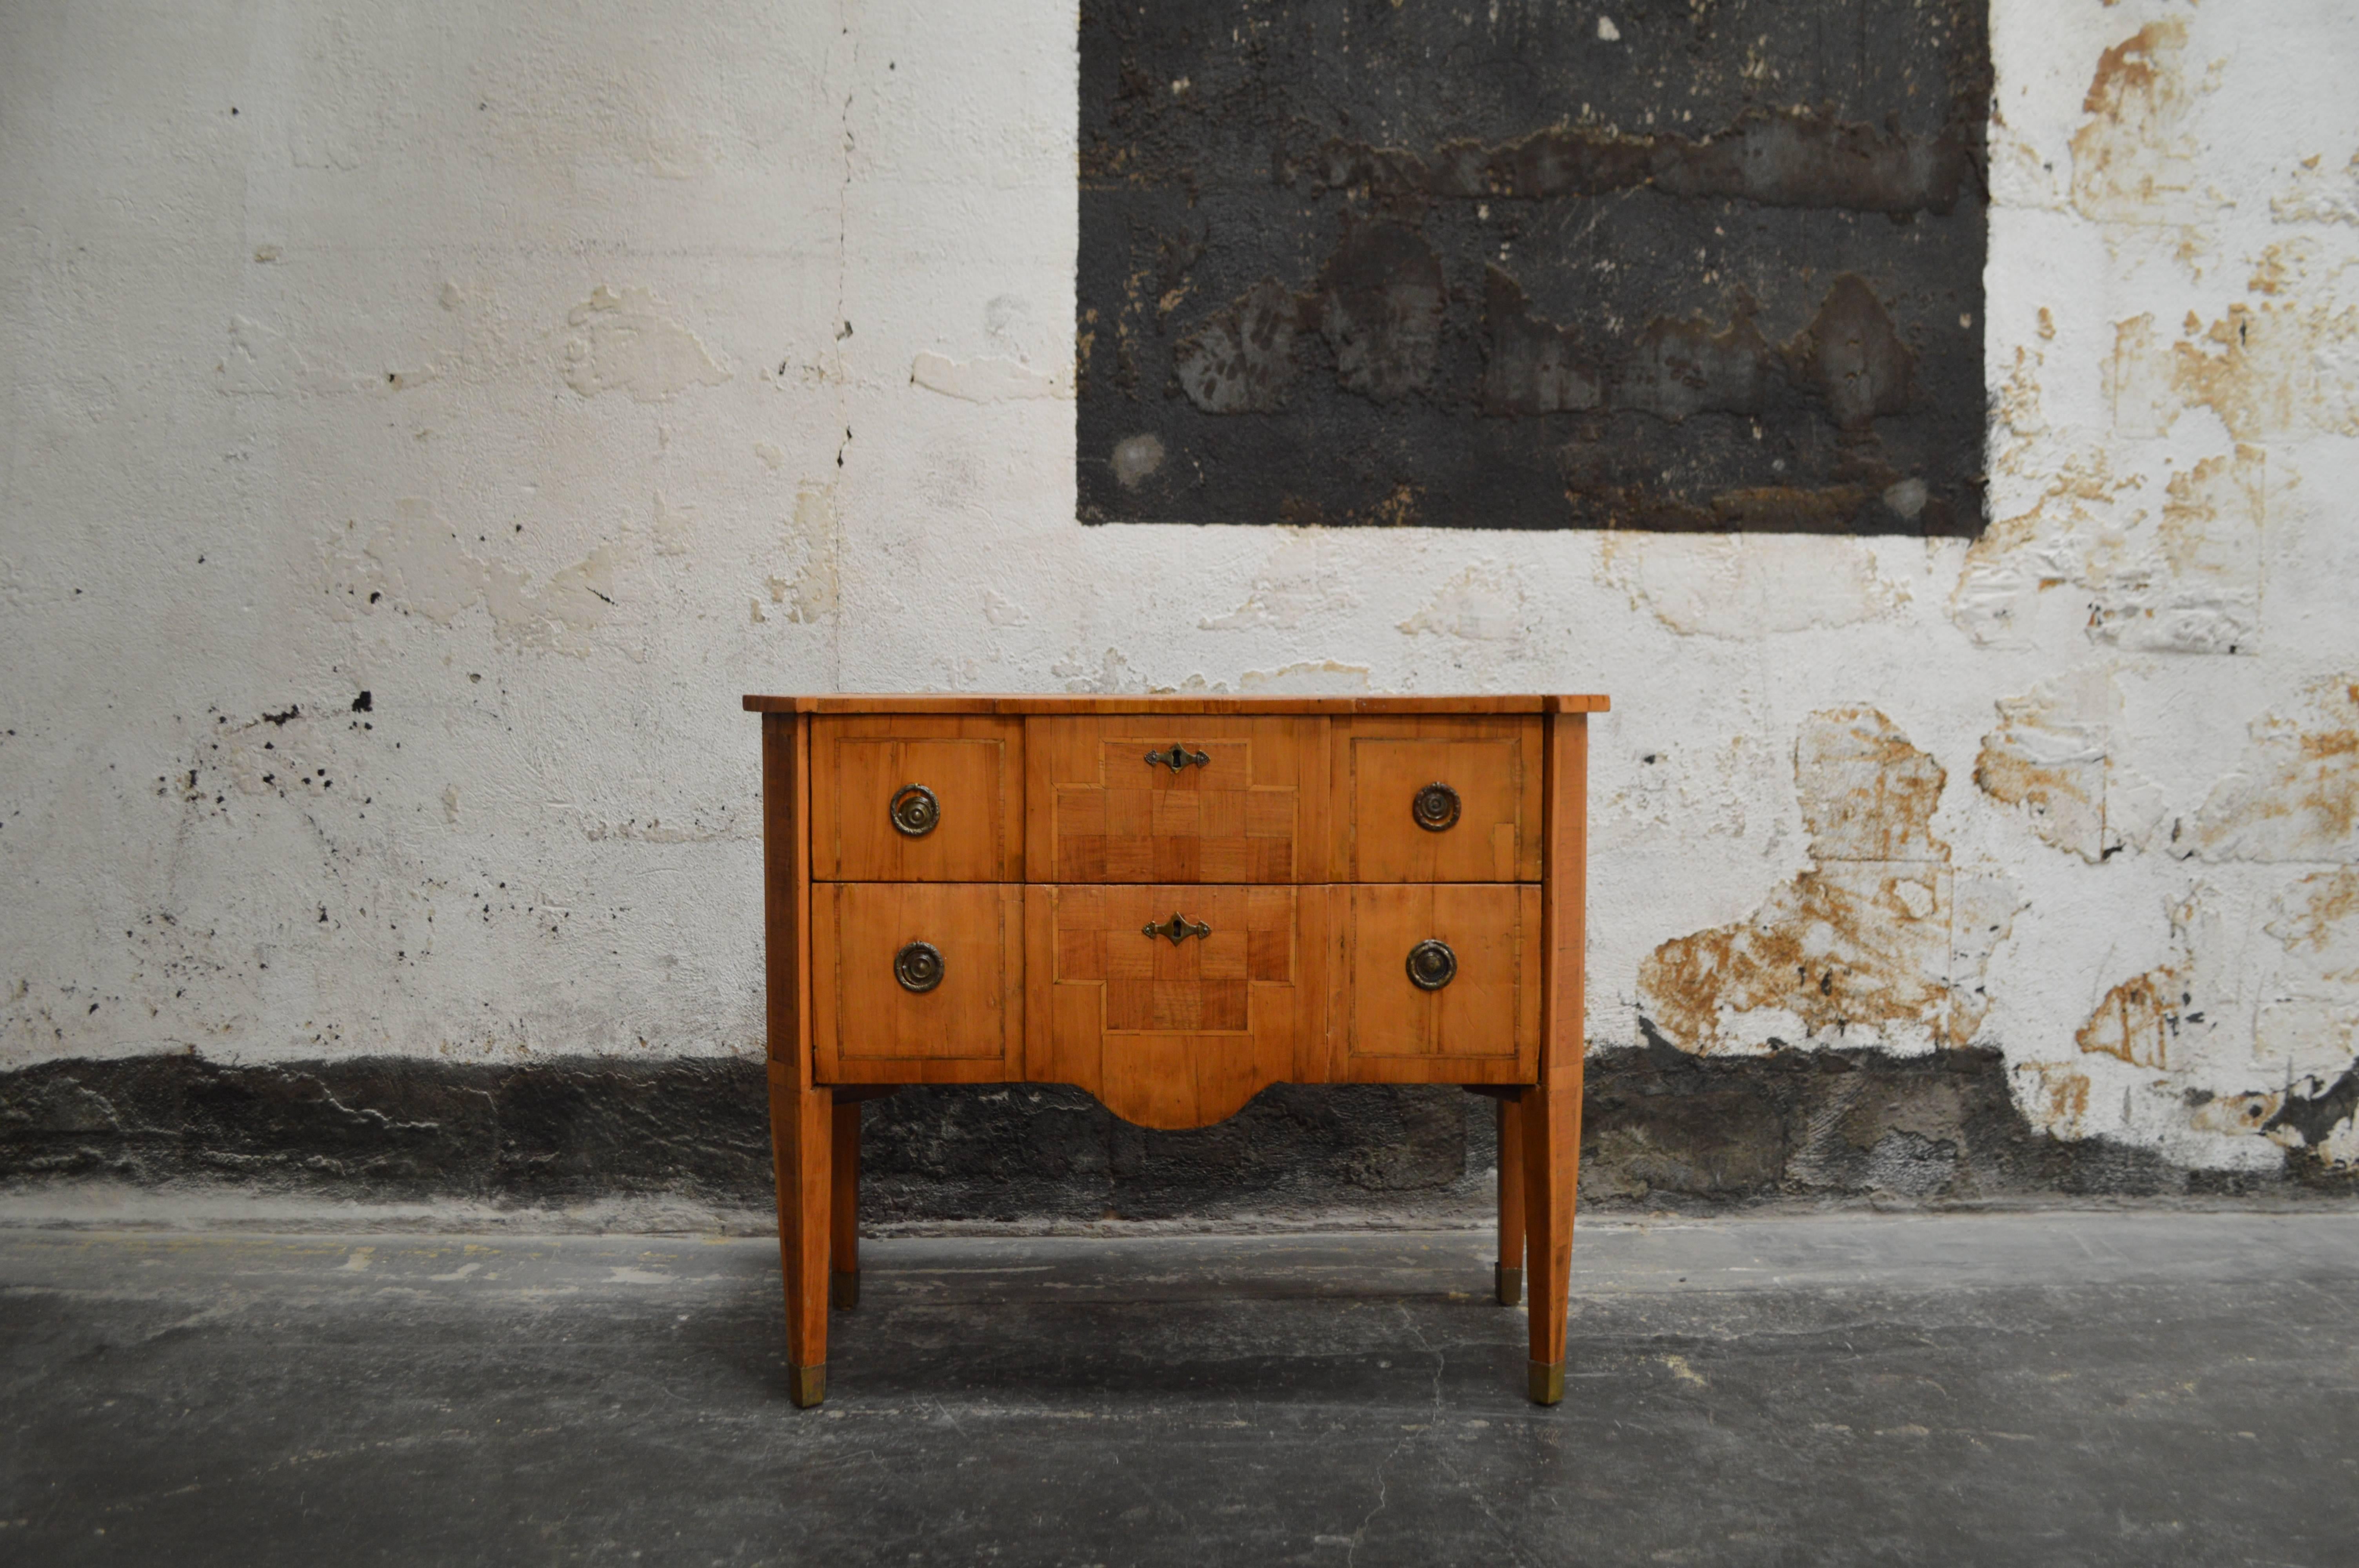 Handsome tailored Swedish chest inlaid parquetry and round Gustavian style pulls. It has been sealed but any natural cracks or patina have been kept and preserved. Two solid drawers atop tapered legs with brass cup details. Functional beauty as a